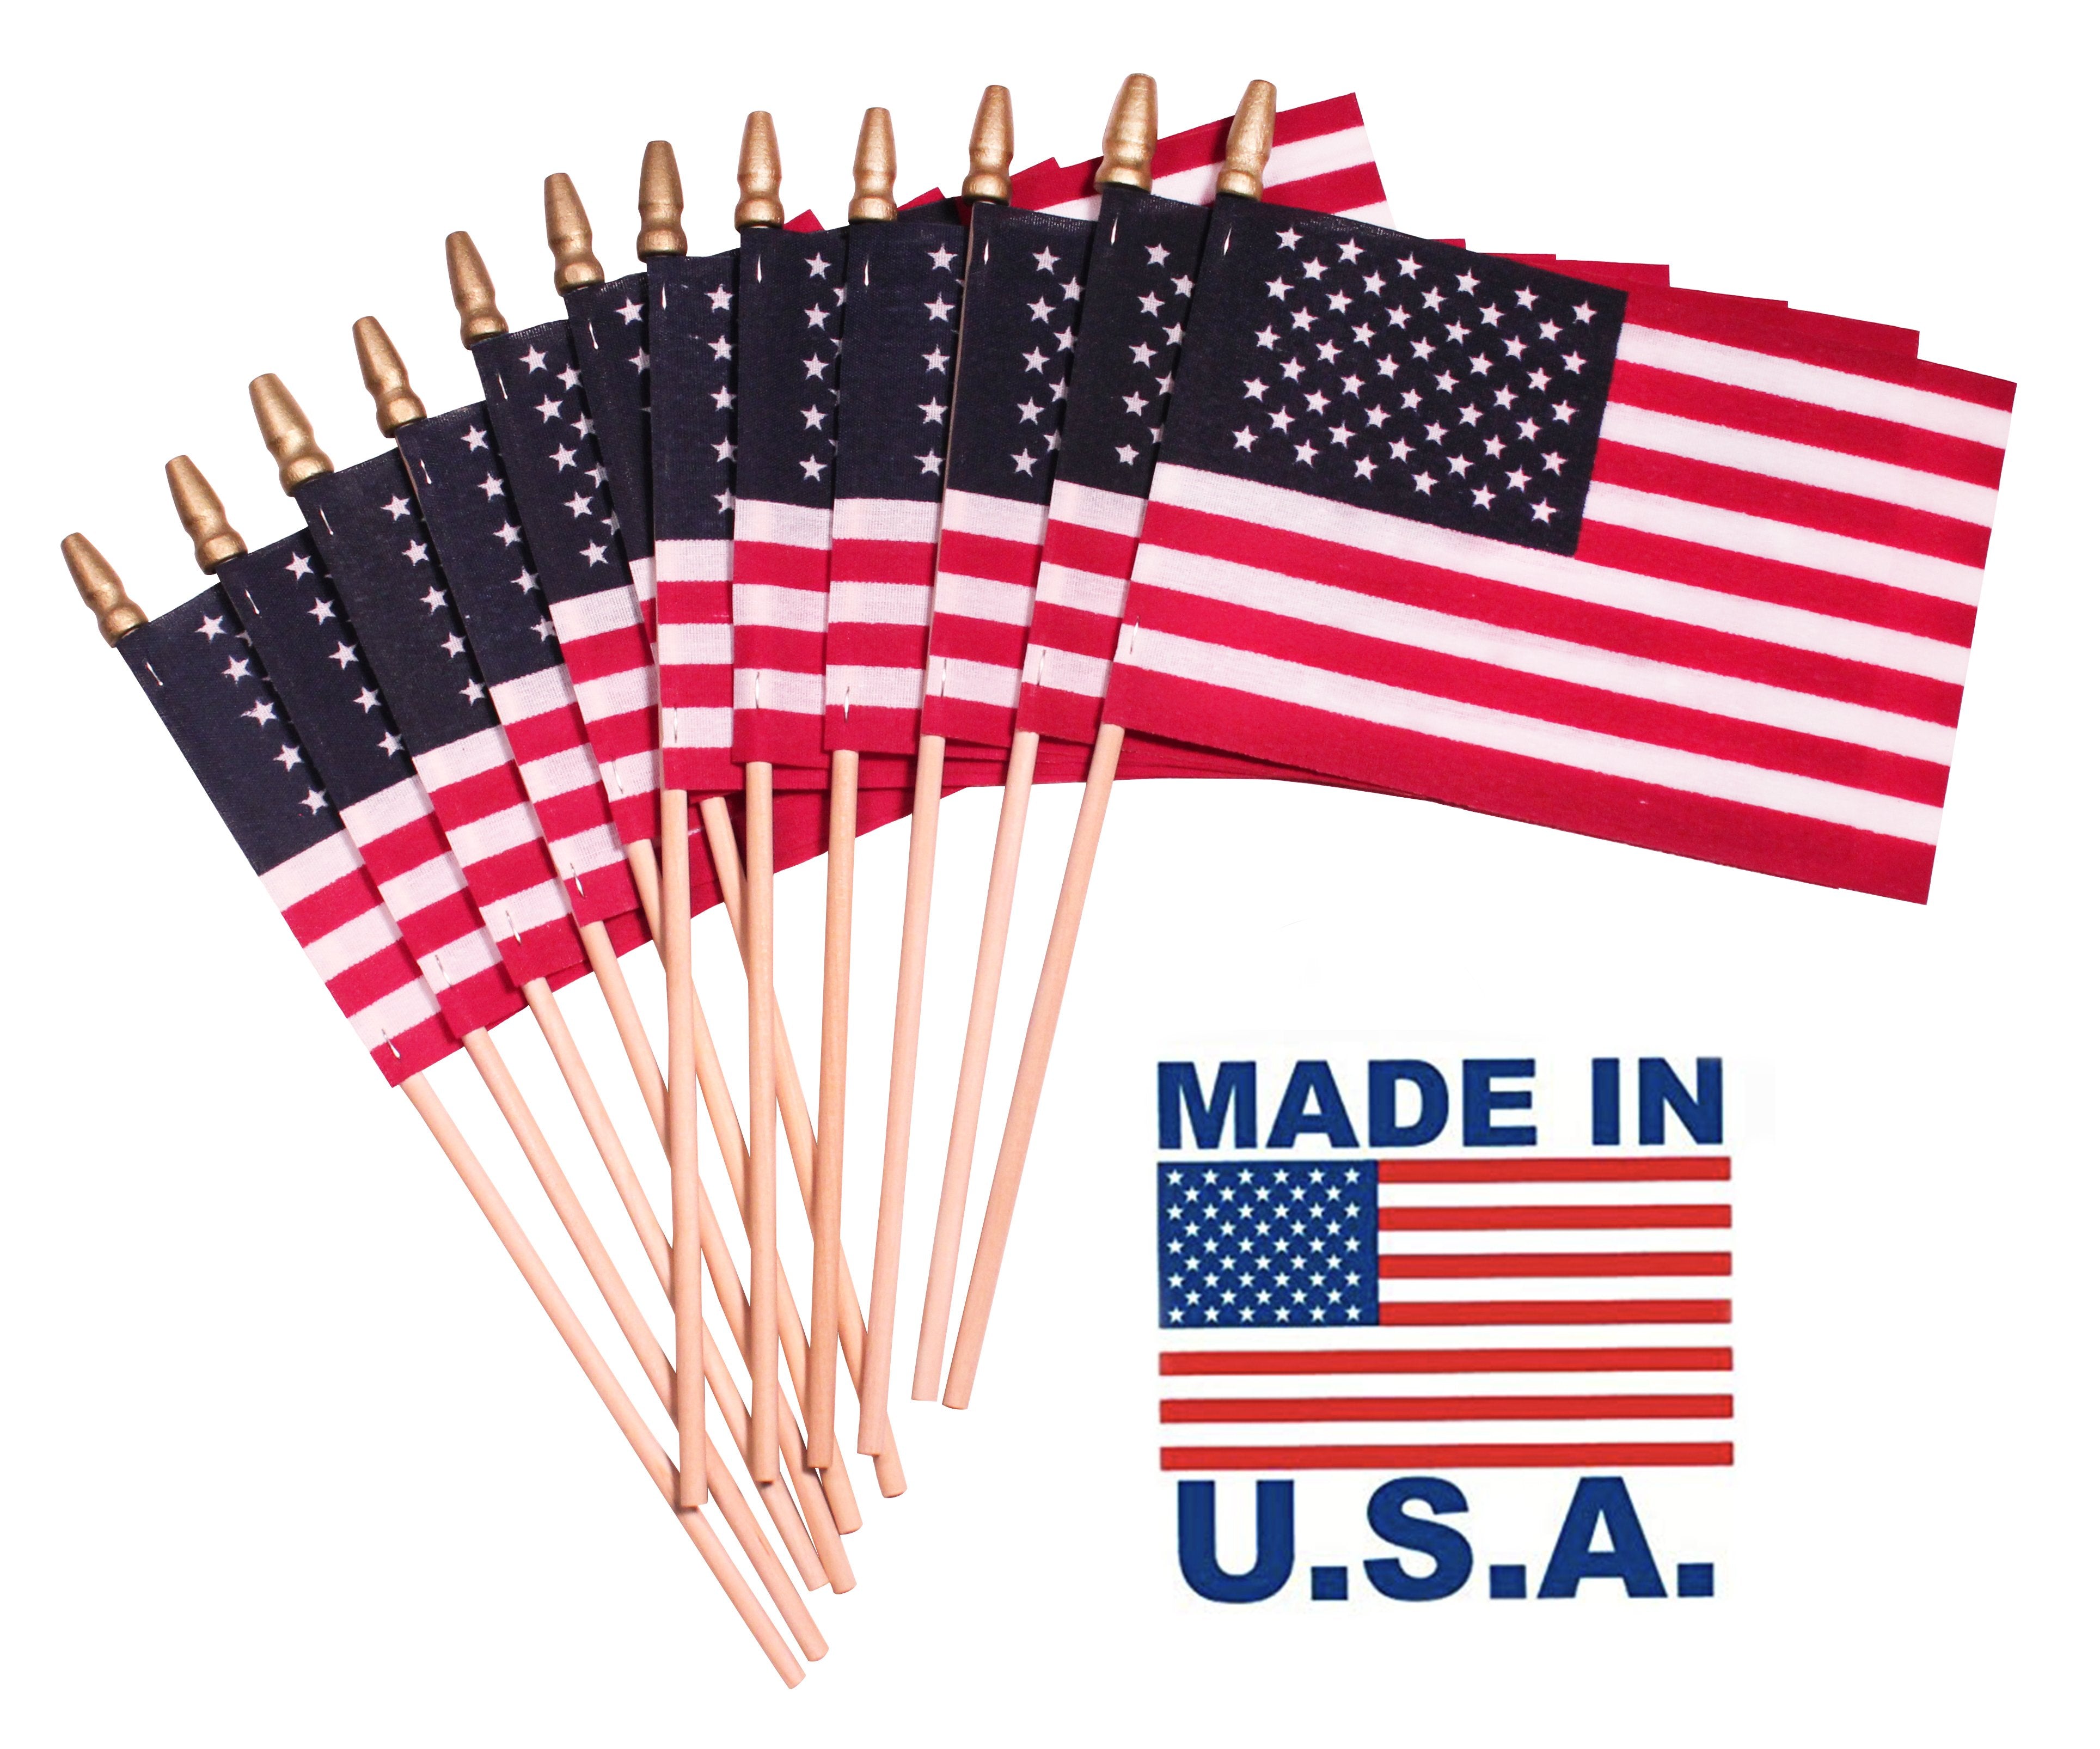 40-4X6 COTTON MADE IN AMERICAN HAND STICK FLAGS Benefits End to Epilepsy! 